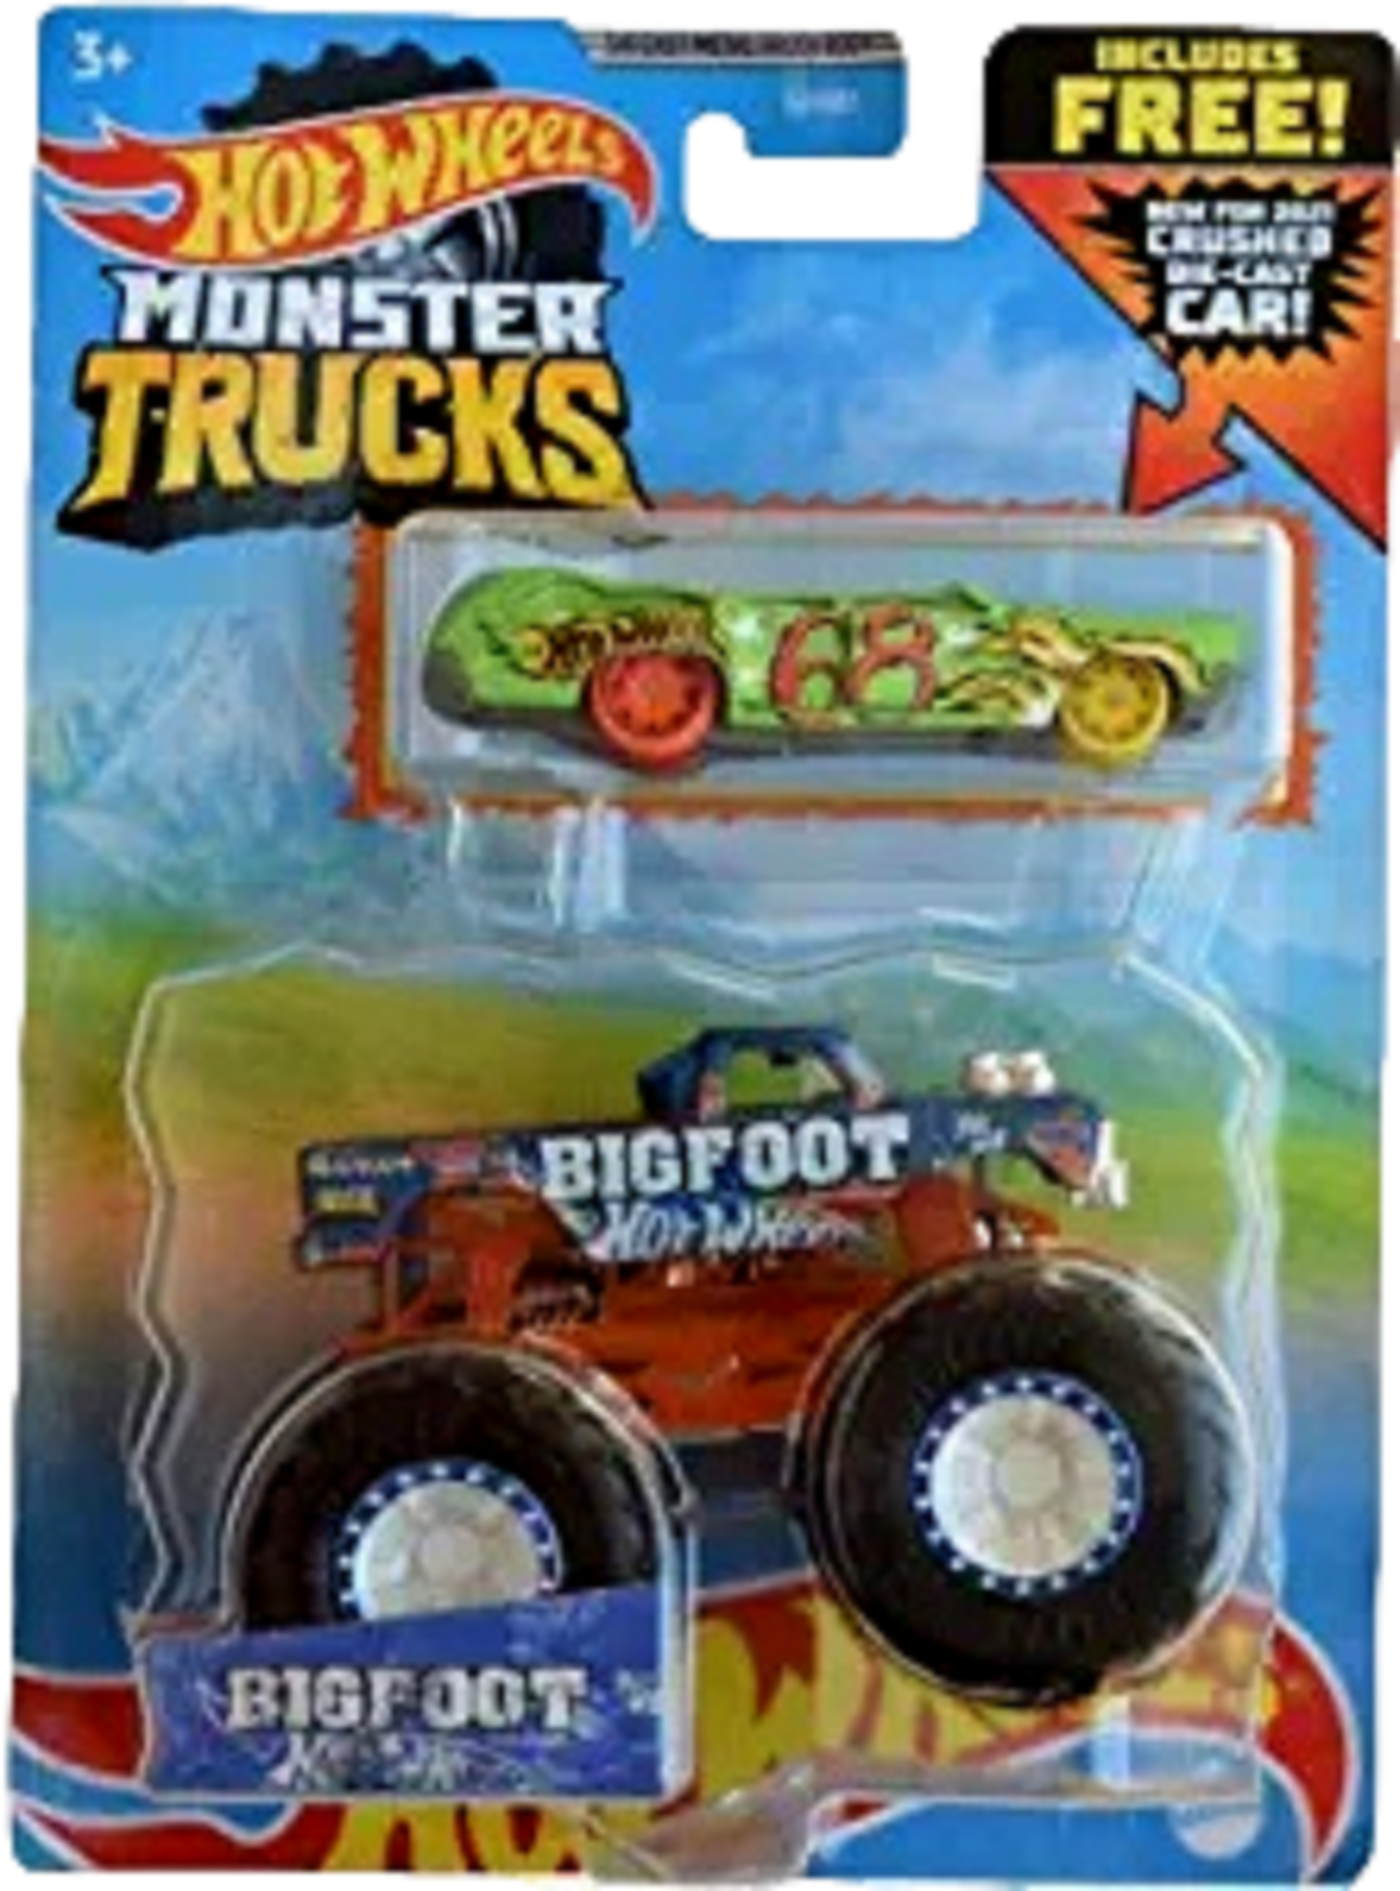 Hot Wheels Bundle of 2 Exclusive Monster Trucks (1:64 Scale) Includes:  BigFoot (with crushed die-cast car) and Bone Shaker (with re-crushable car)  For 